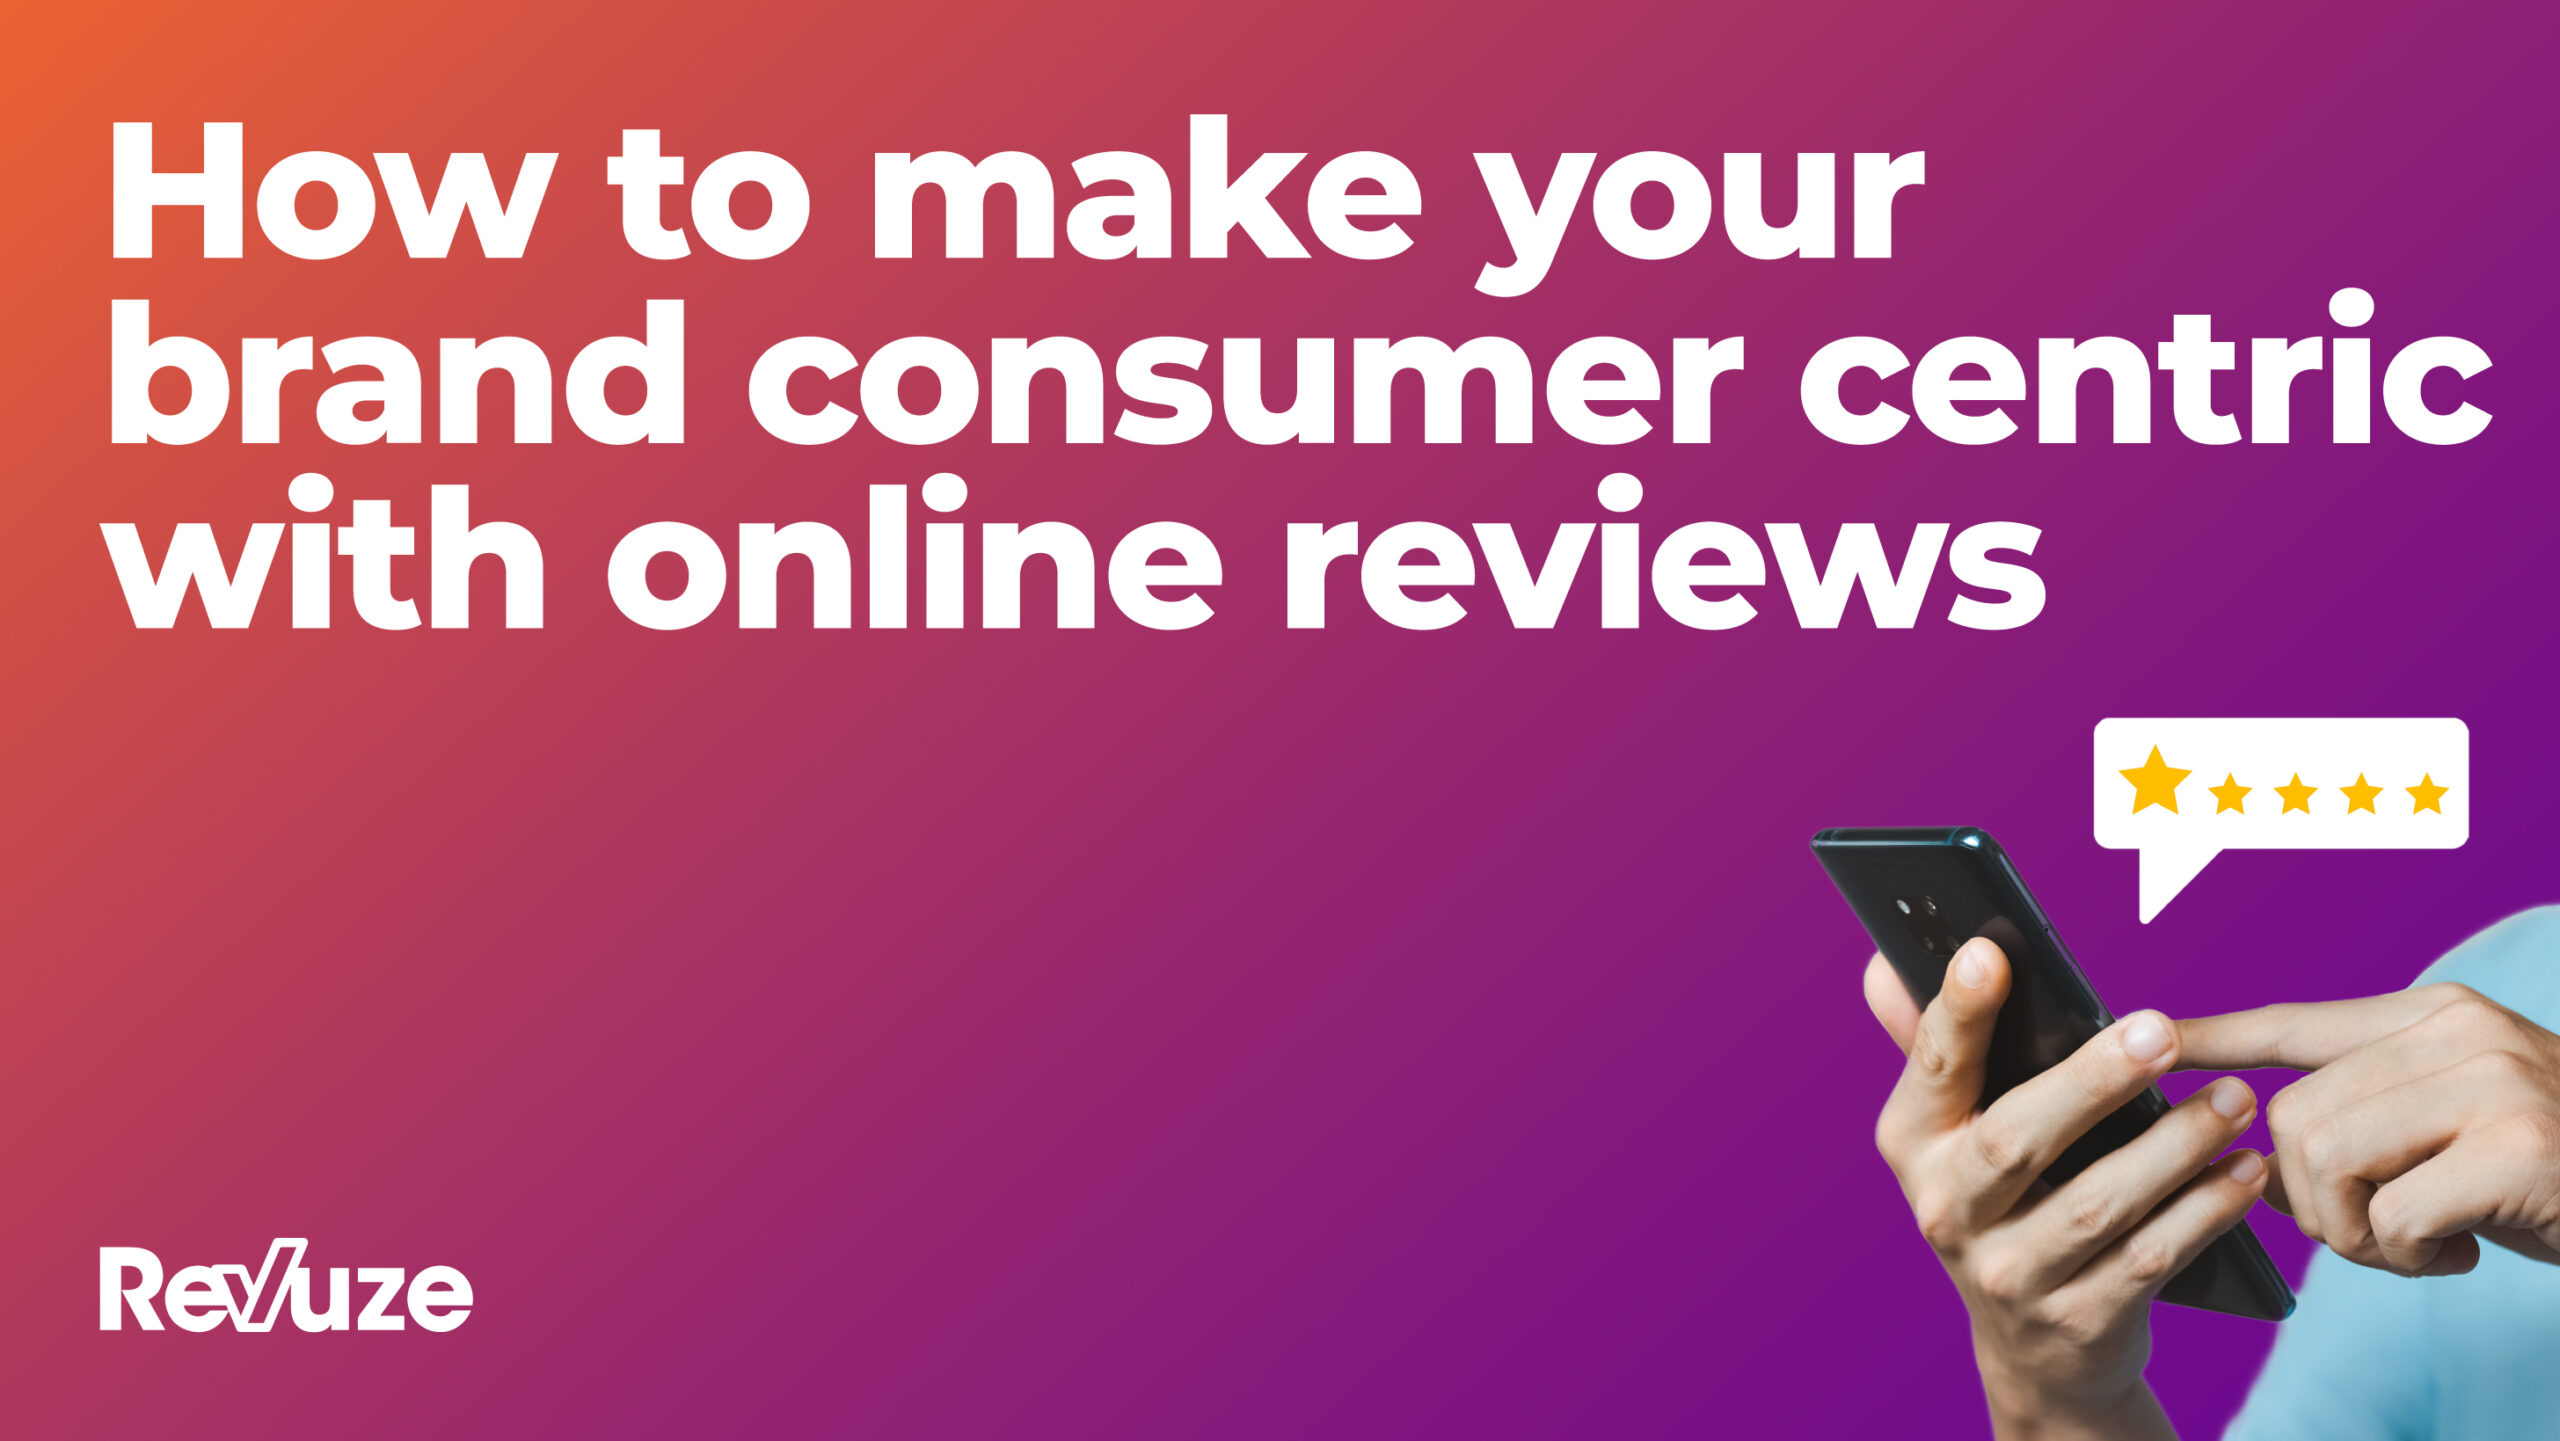 How to make your brand consumer centric with online reviews